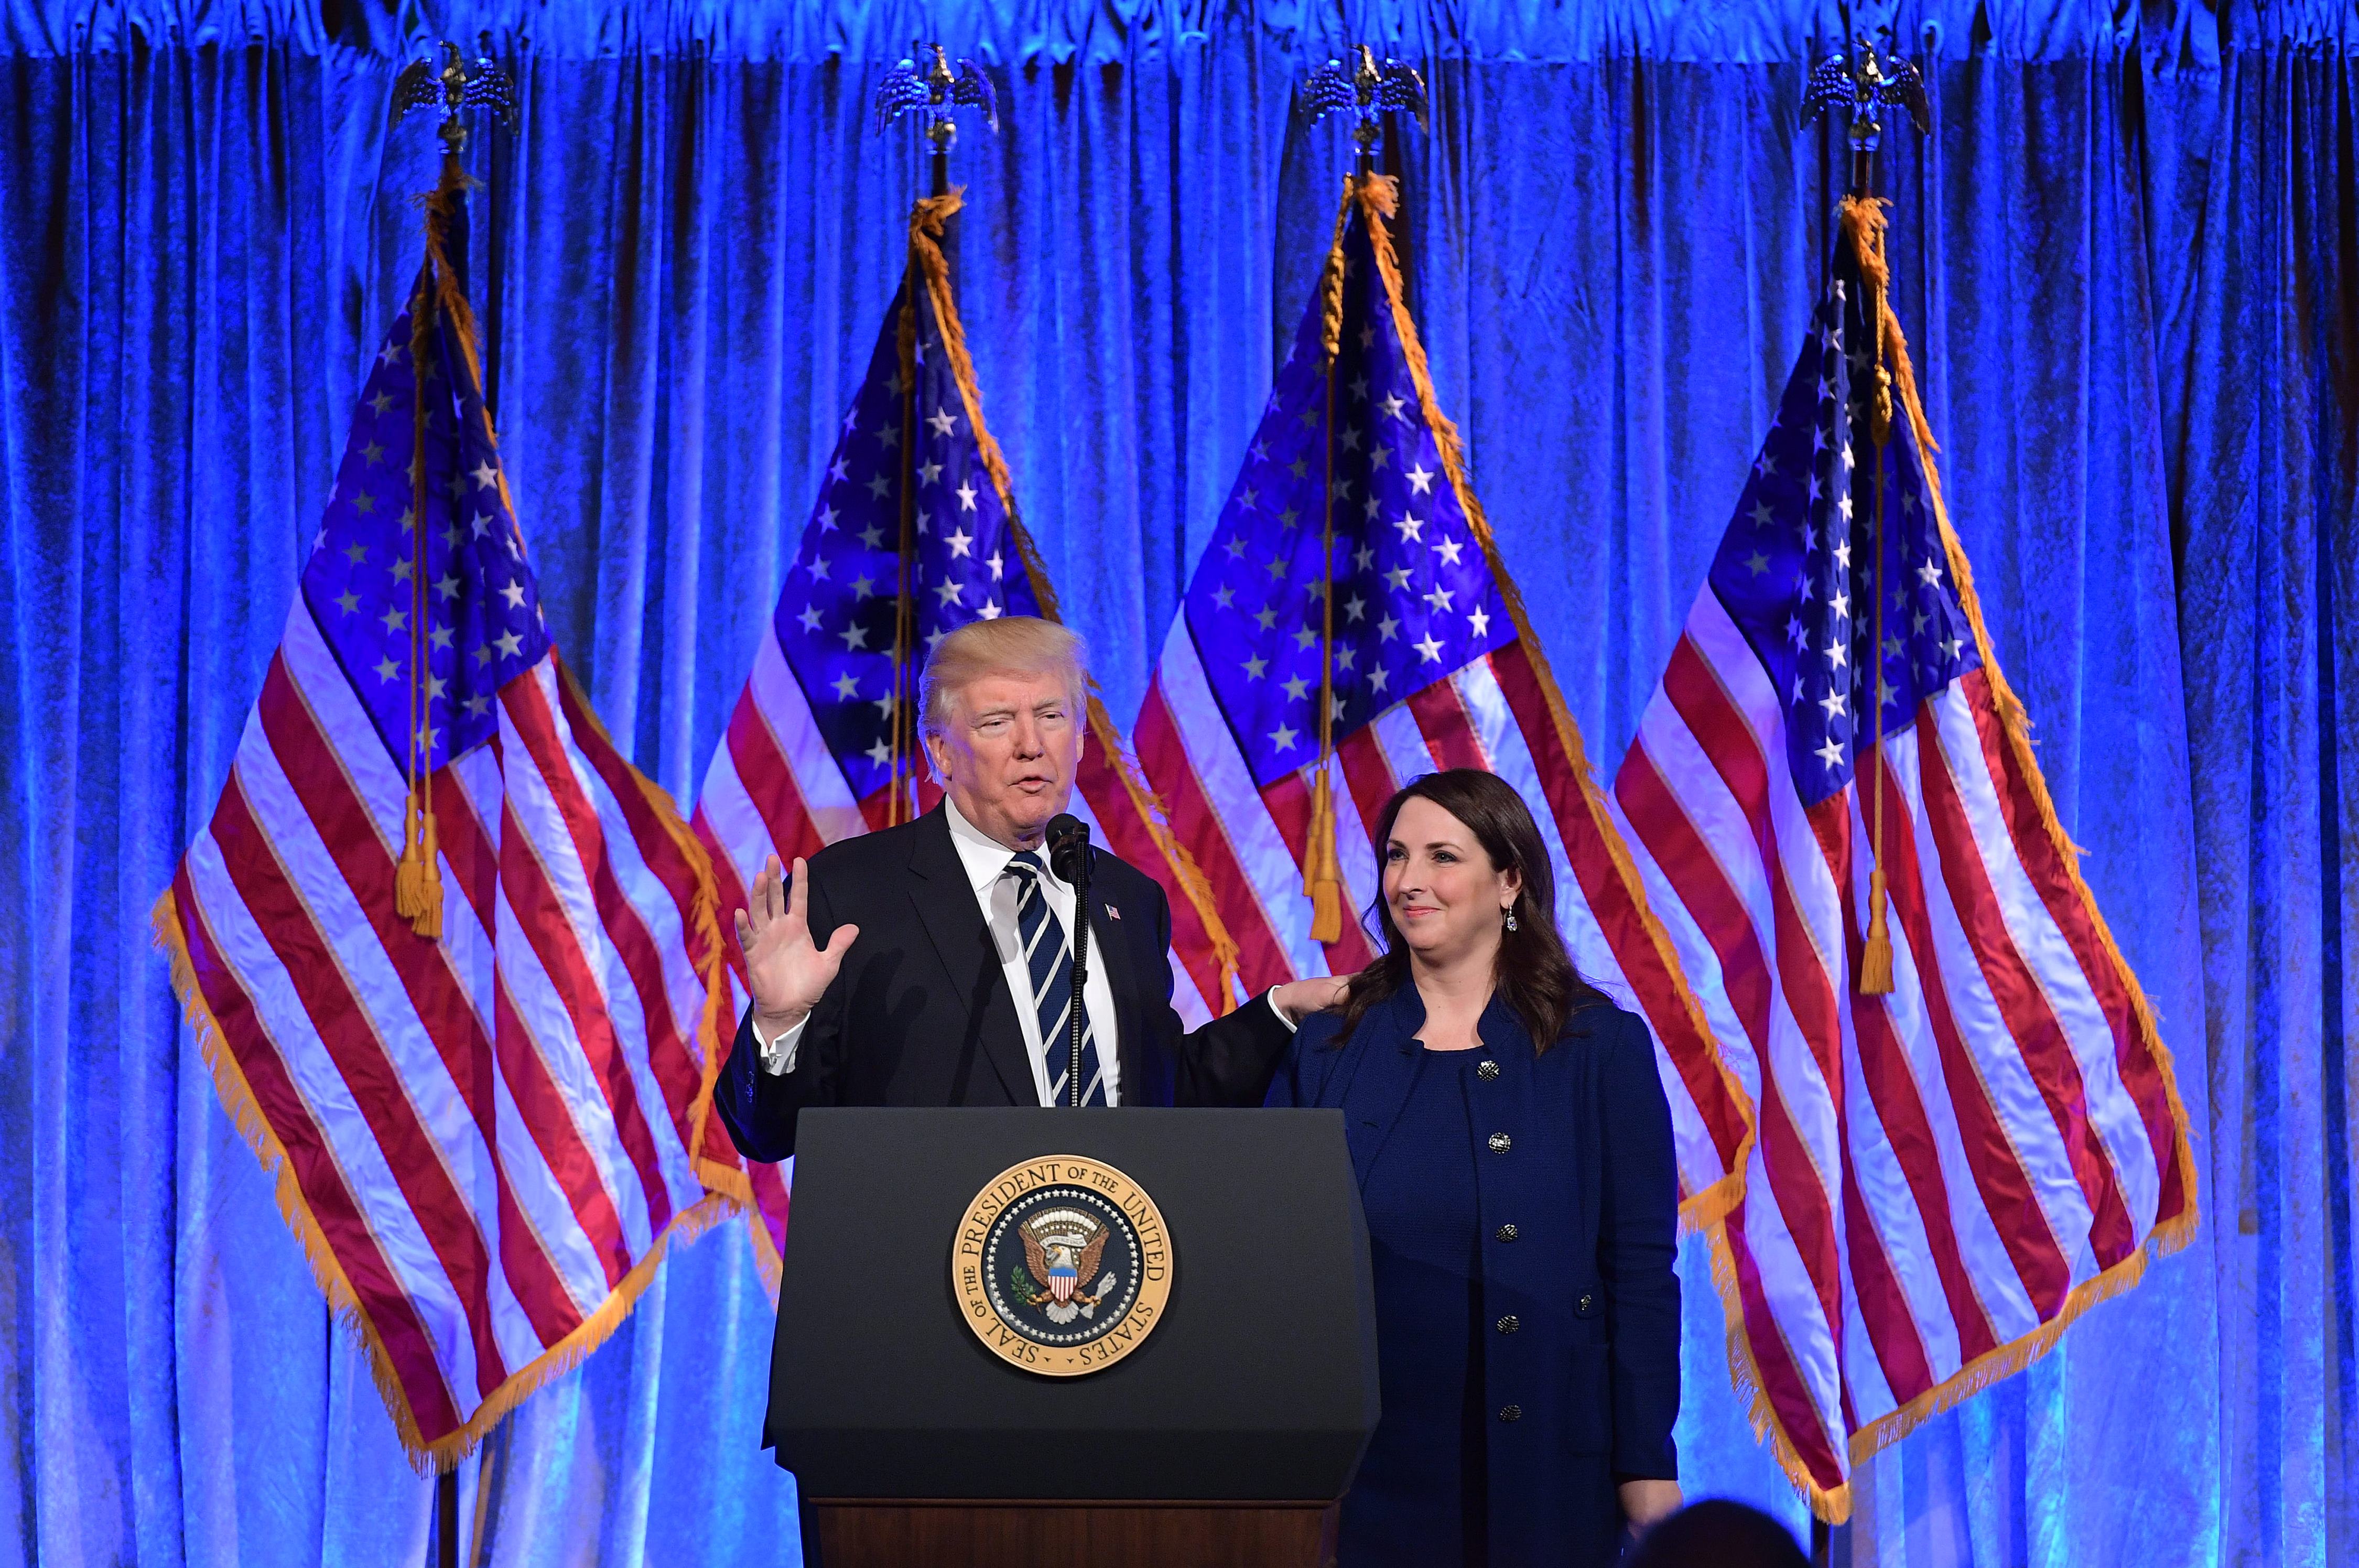 Donald Trump and Ronna McDaniel at a fundraising event in New York City in 2017